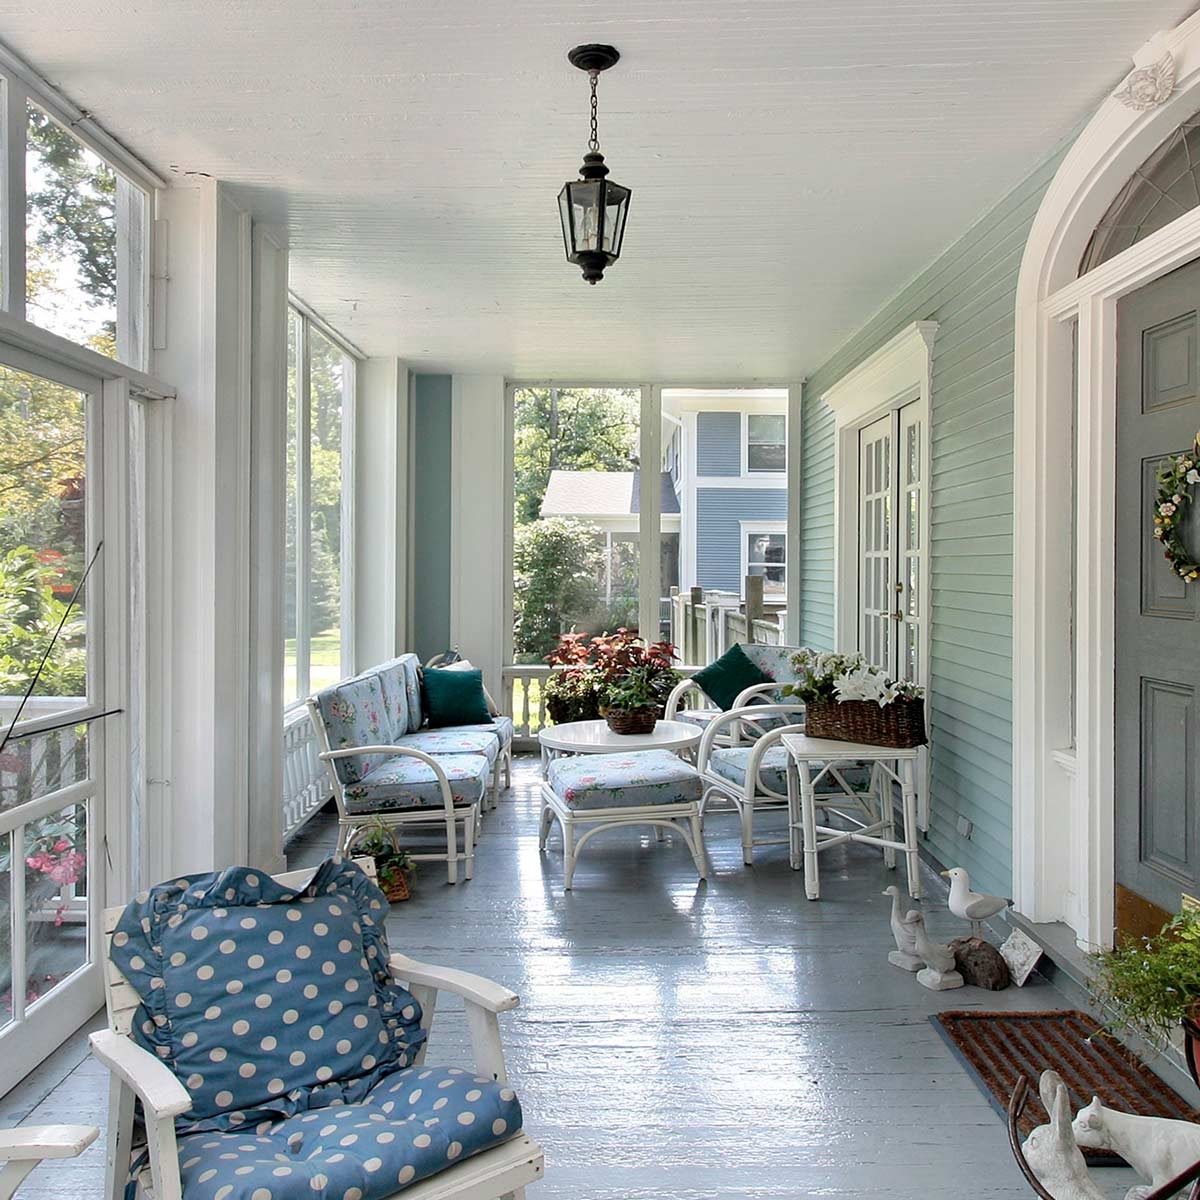 10 Front Porch Ideas That You’ll Love